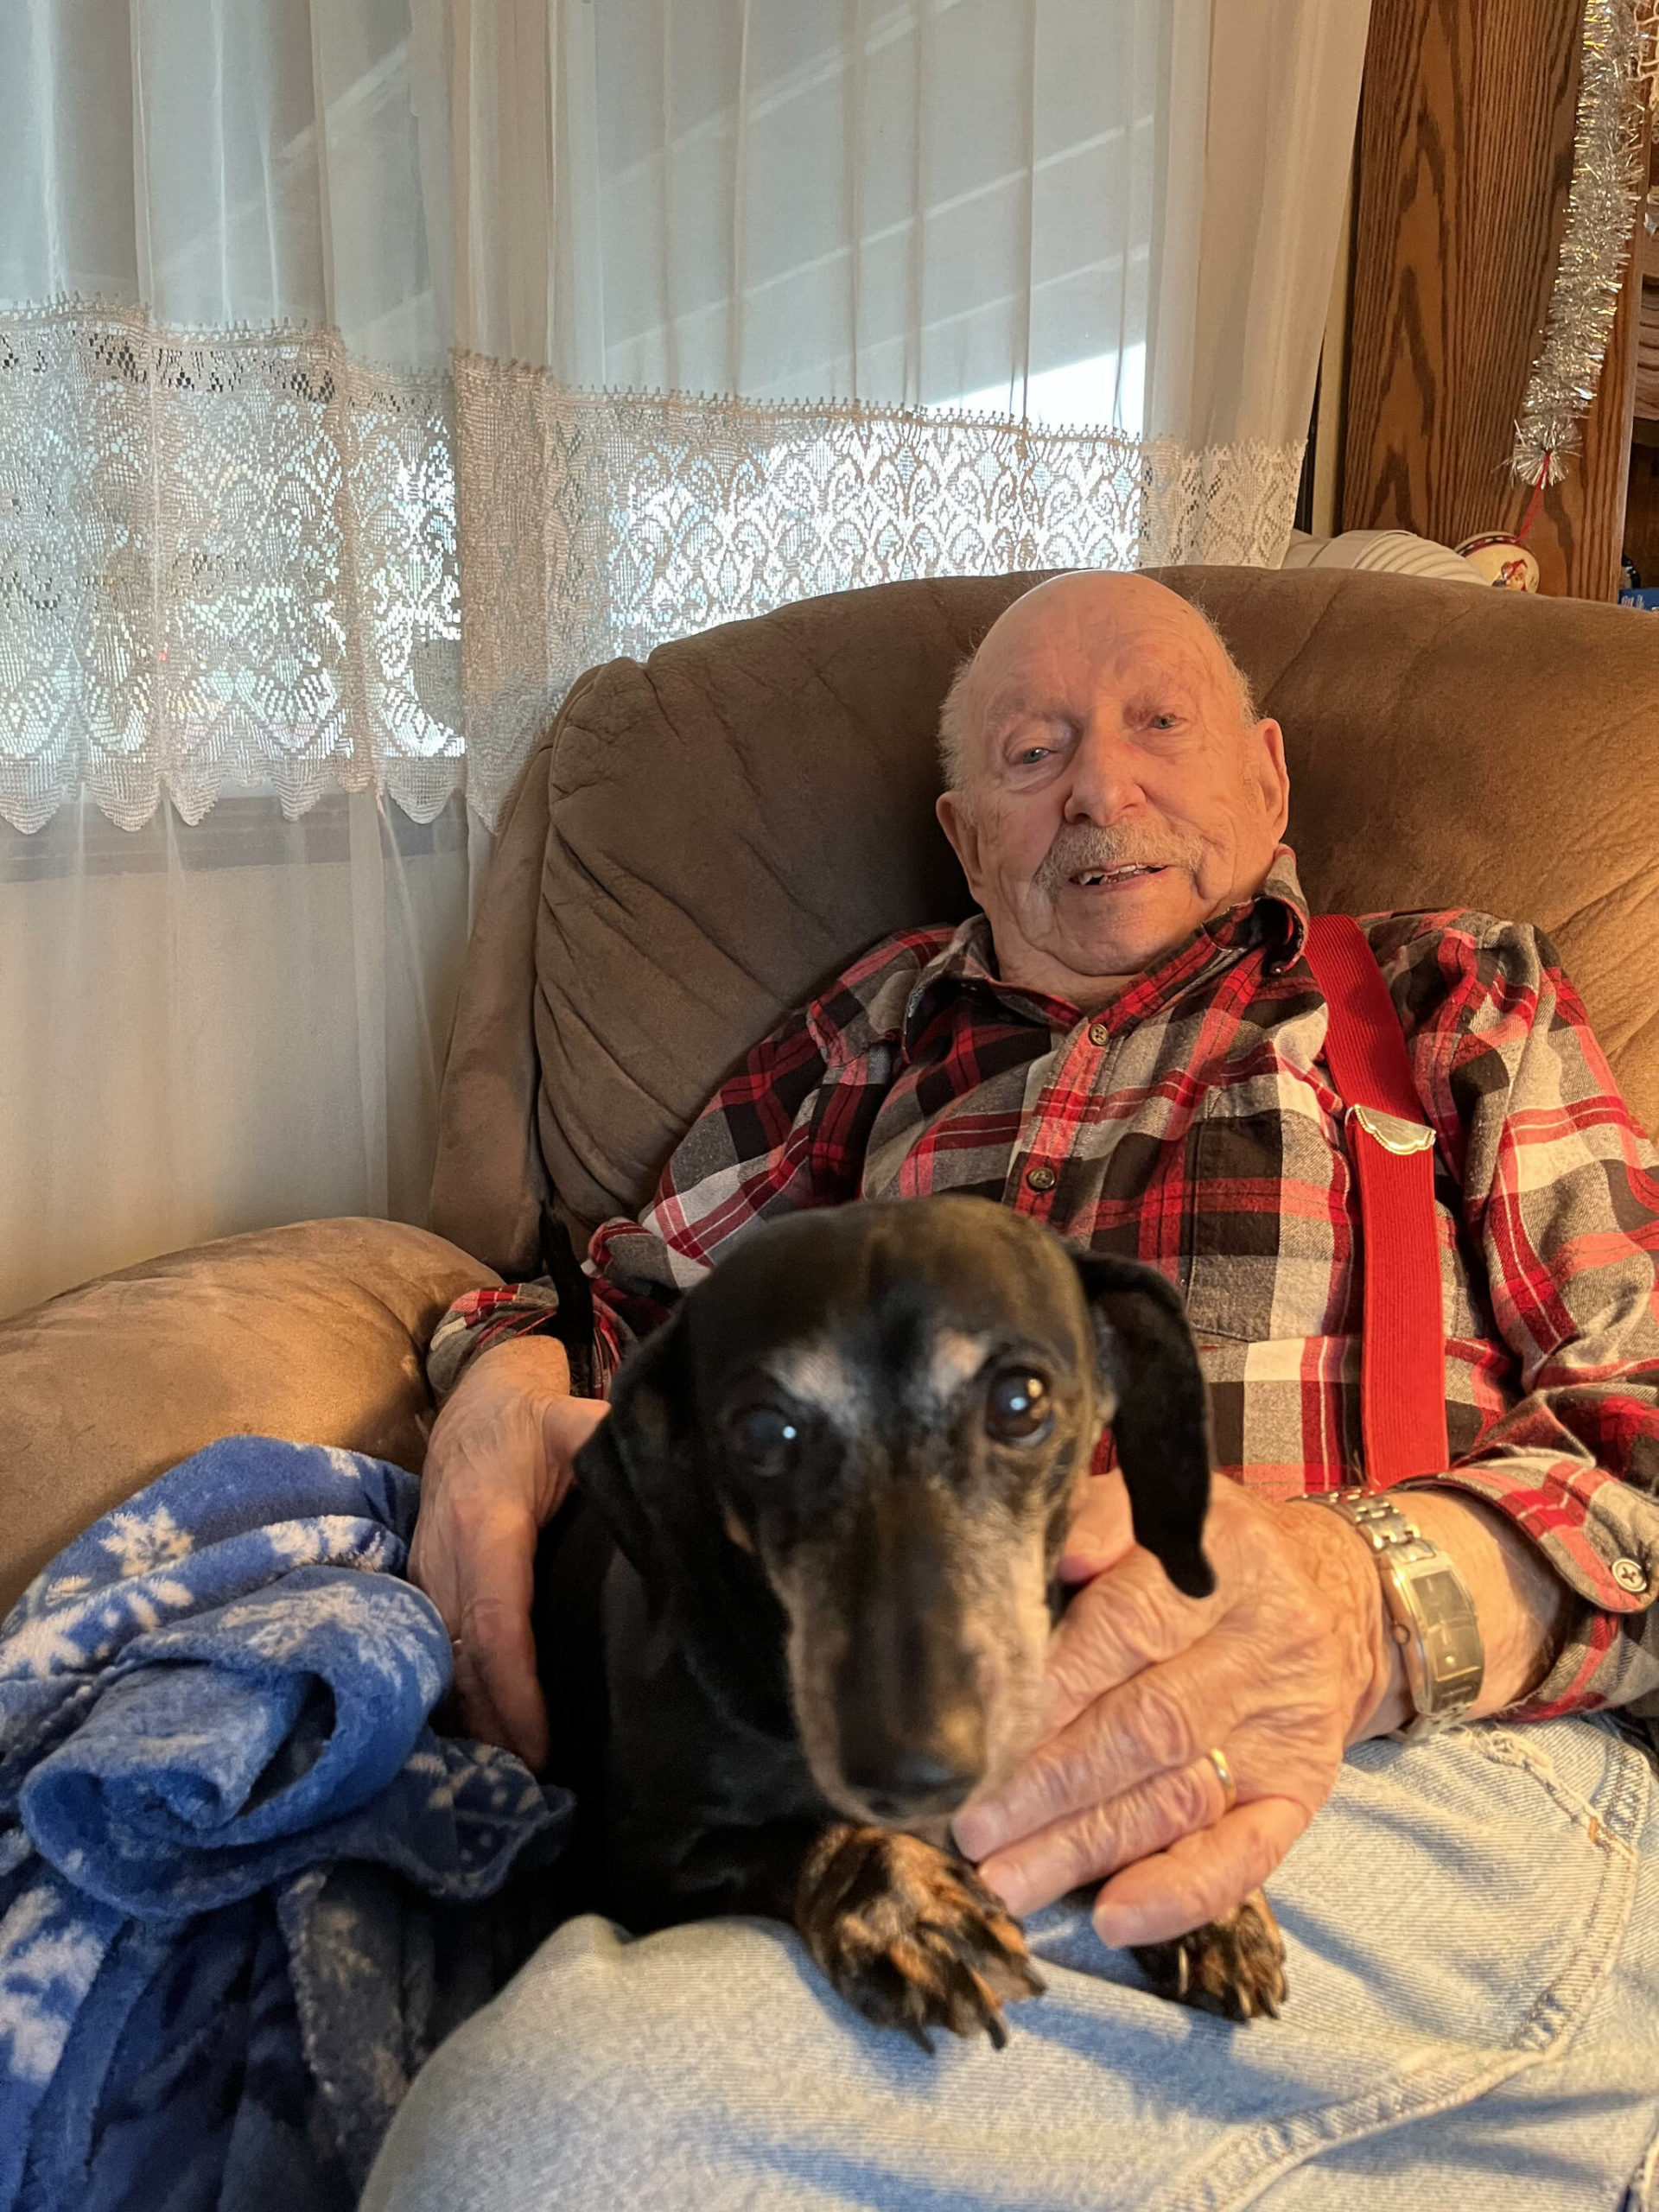 Matthew N. Wells | The Daily World 
Retired Pvt. First Class Harold Ralkey, 97, lounges with “Pretty Girl,” an 8-year-old dachshund, on Friday, Nov. 26, 2021, inside Ralkey’s home in Elma. Ralkey’s daughter, Carol Bogar, said the dog keeps him alive. “She sleeps with him under the covers,” she said. “That’s his baby.”